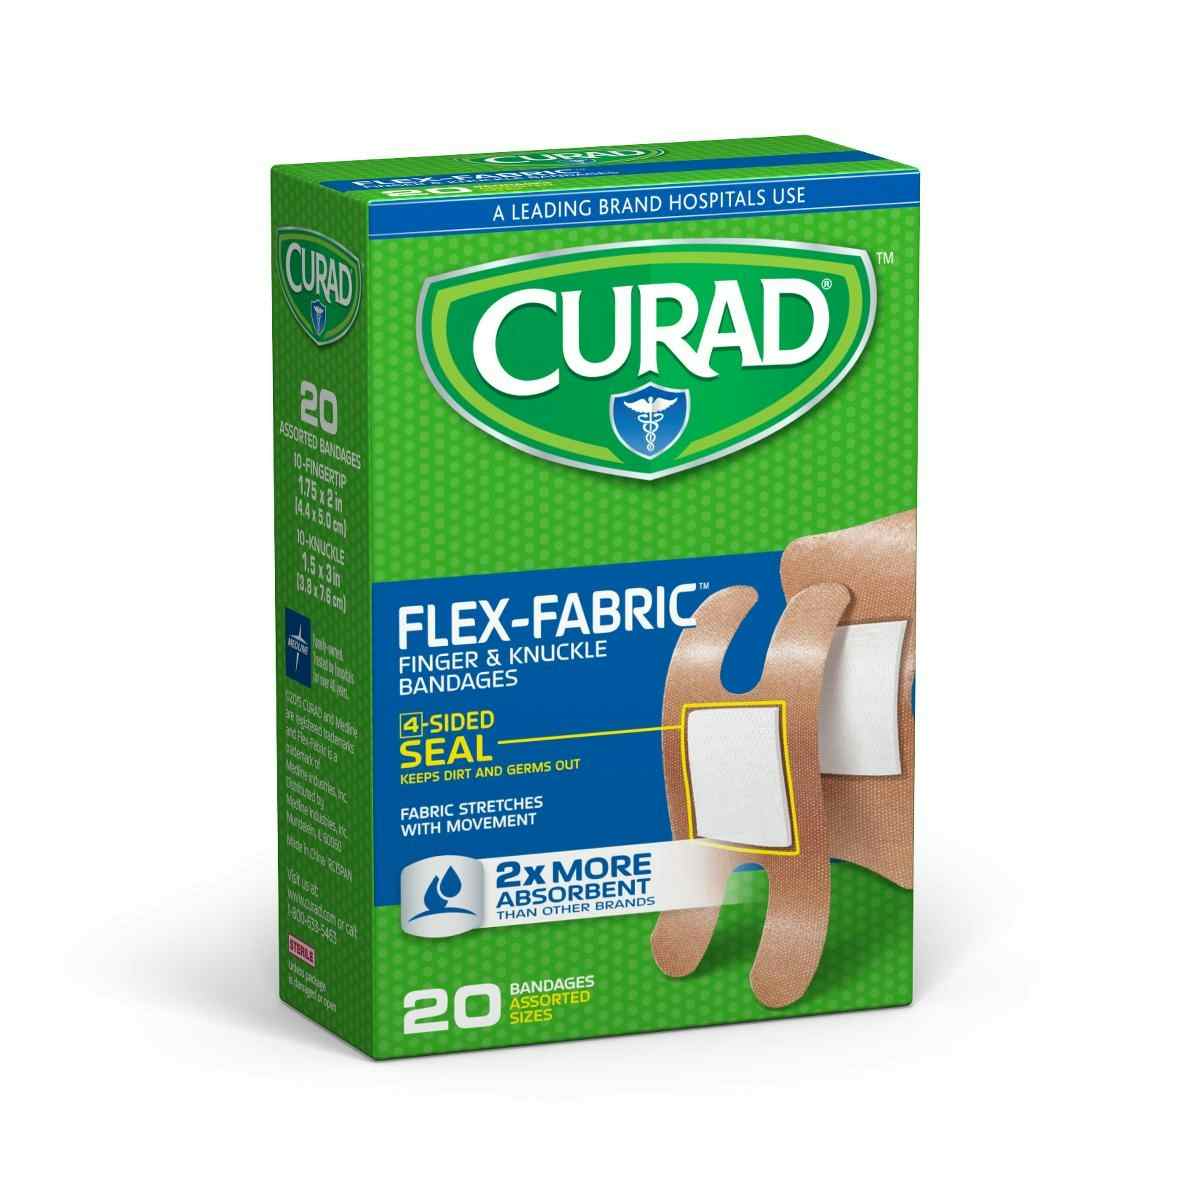 Curad Flex-Fabric Finger and Knuckle Bandages, Assorted Sizes, CUR45246RB, Case of 24